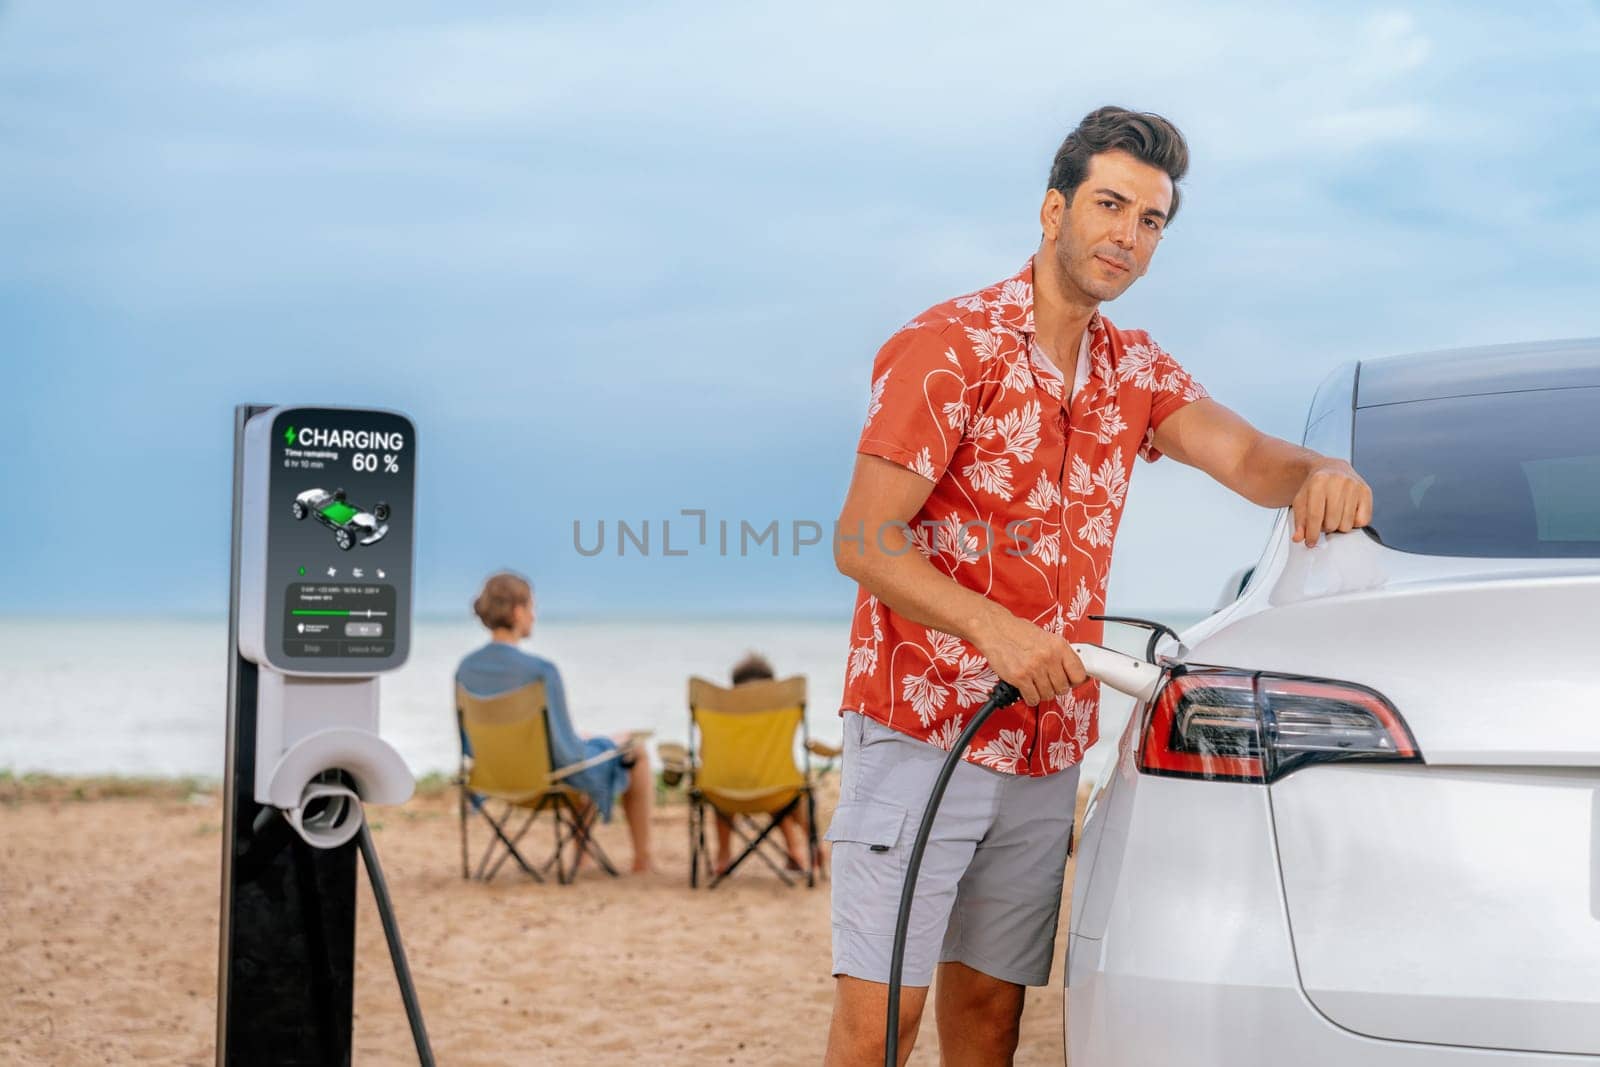 Family vacation trip traveling by the beach with electric car, dad or father recharge EV car while his family enjoy seascape beach. Family trip with alternative energy and eco-friendly car. Perpetual